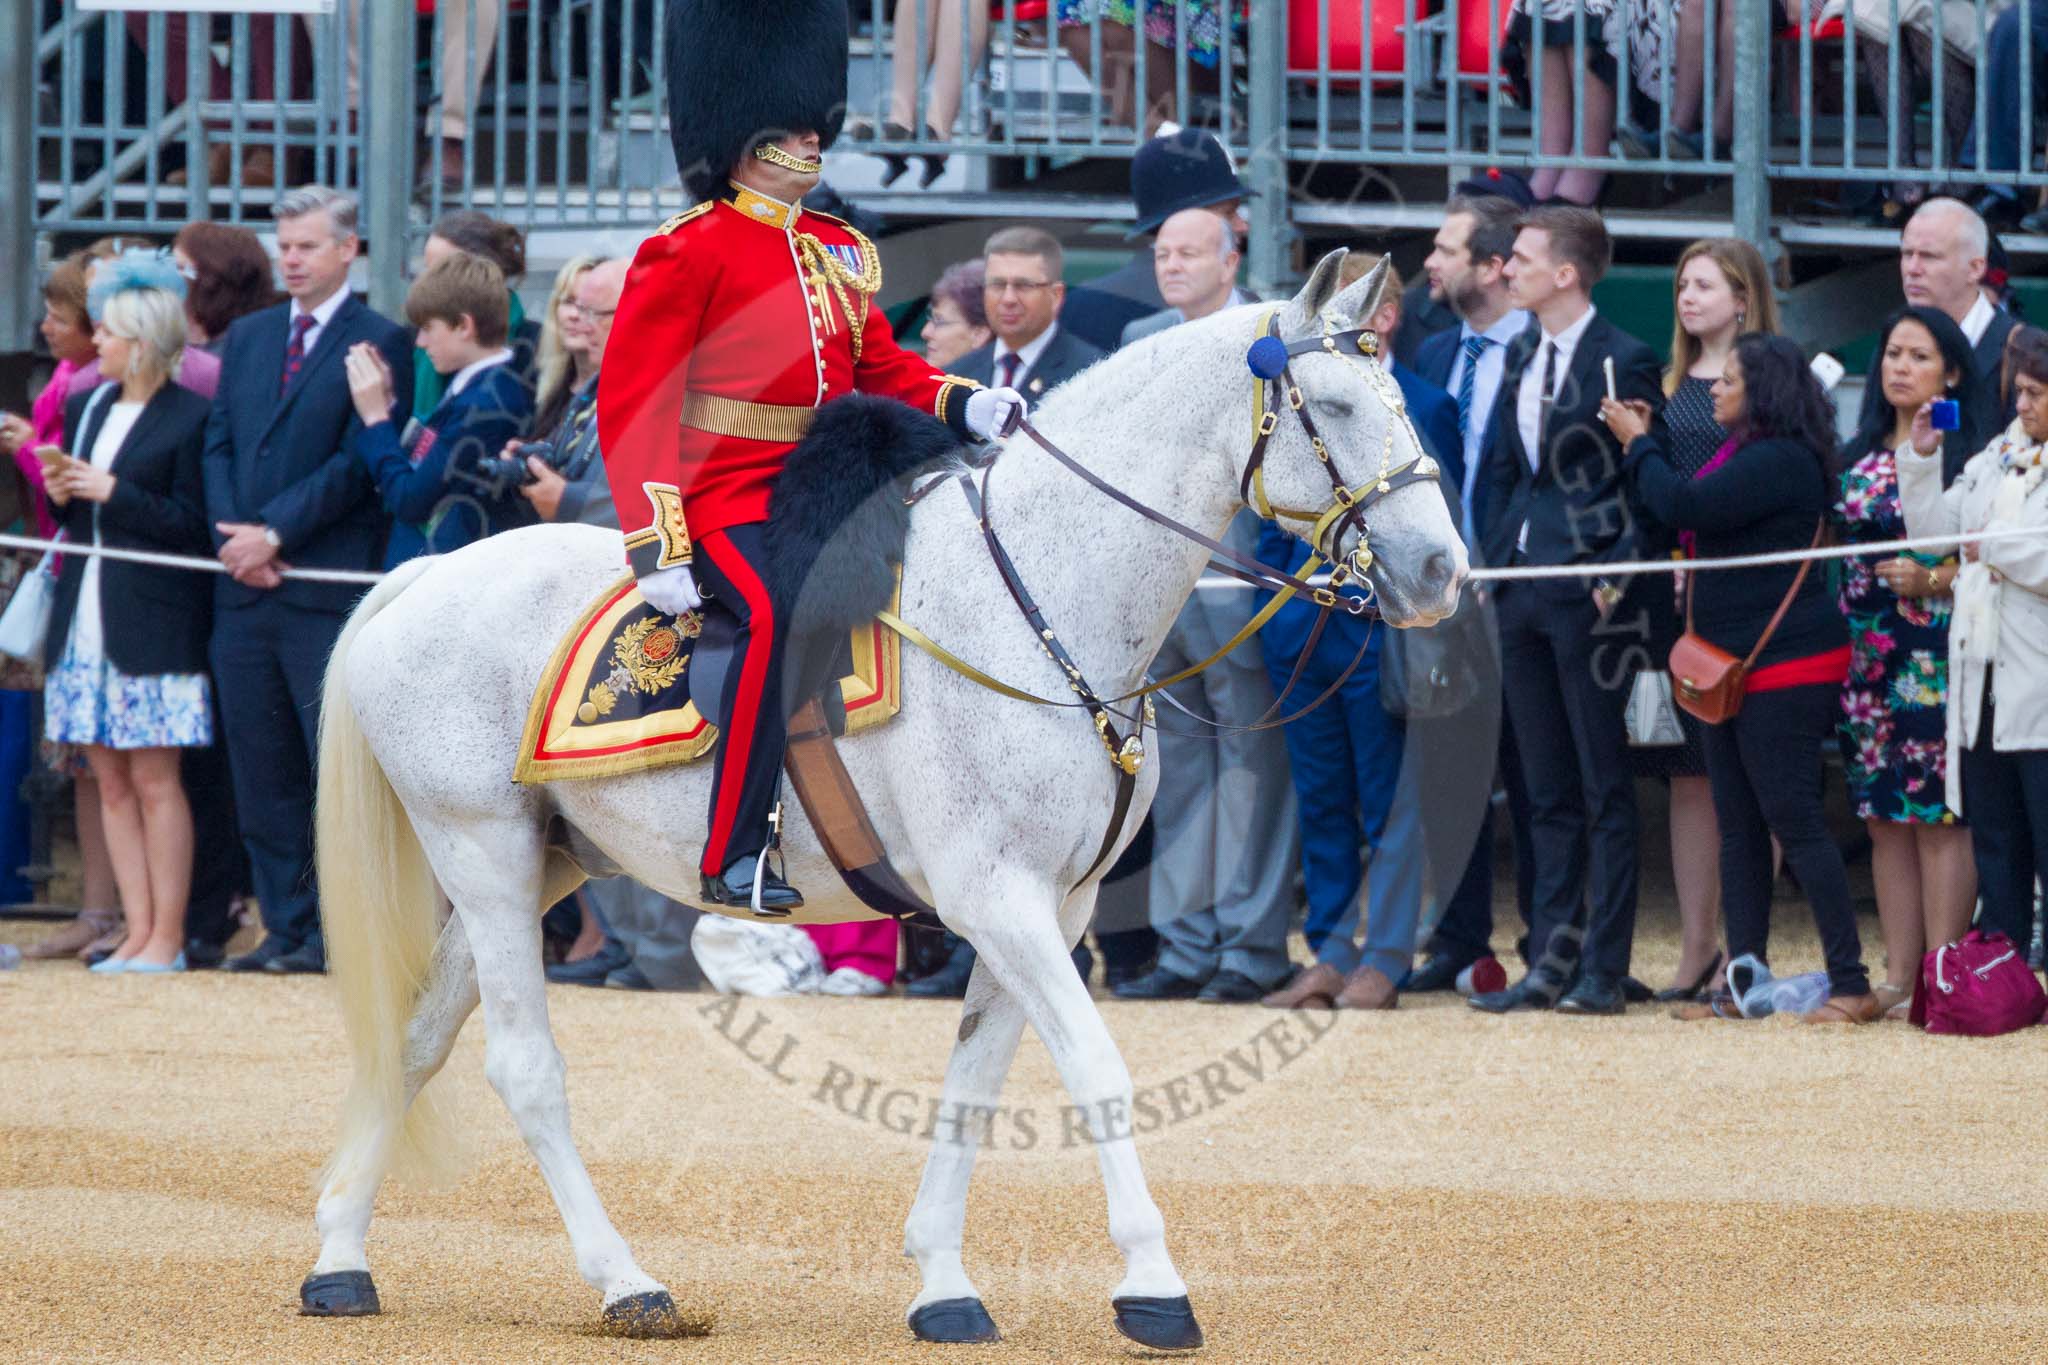 Trooping the Colour 2015. Image #218, 13 June 2015 10:56 Horse Guards Parade, London, UK